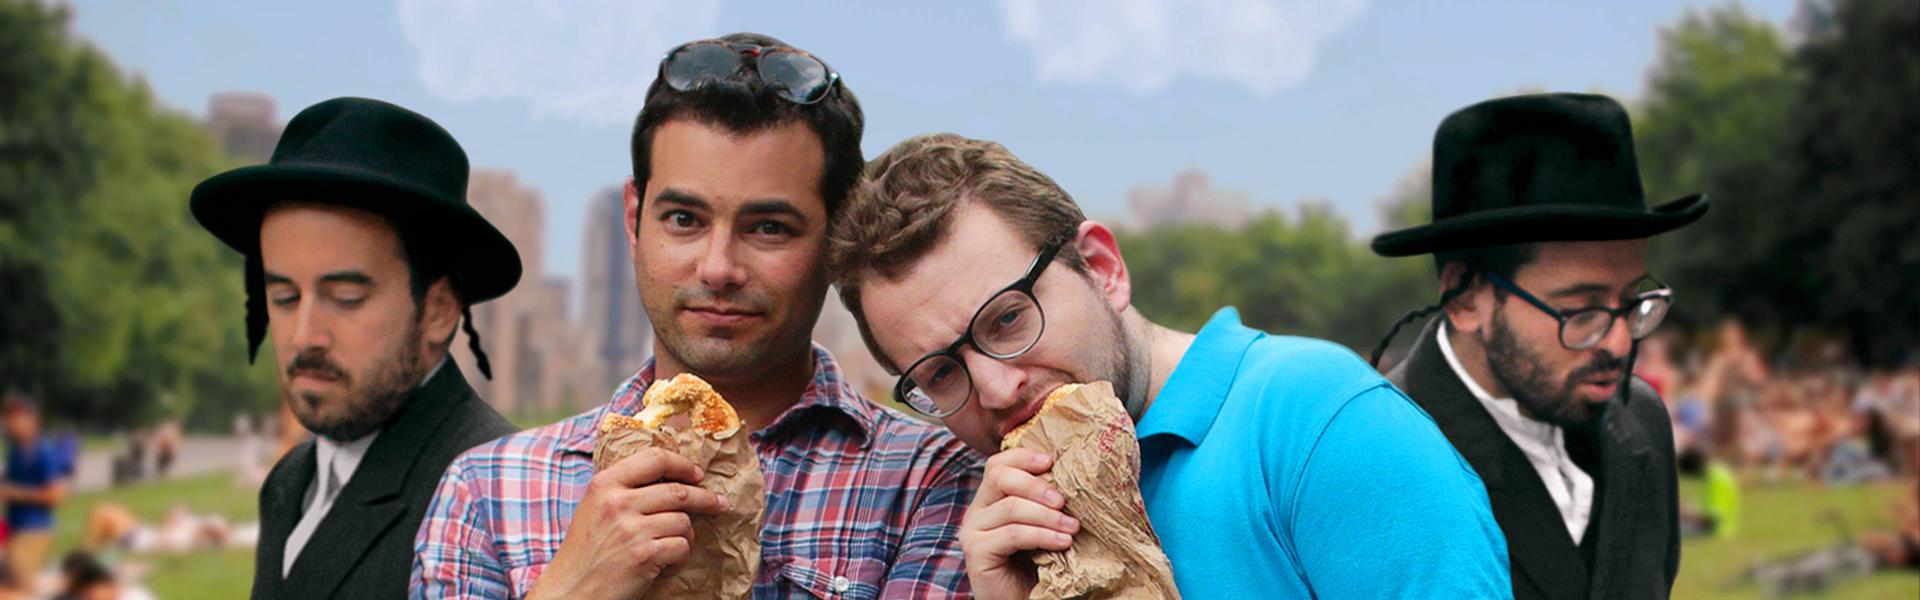 Two men in short-sleeved shirts are standing in the park, eating baked goods out of paper bags and looking at the camera; next to them are two men dressed in Jewish Orthodox clothing.